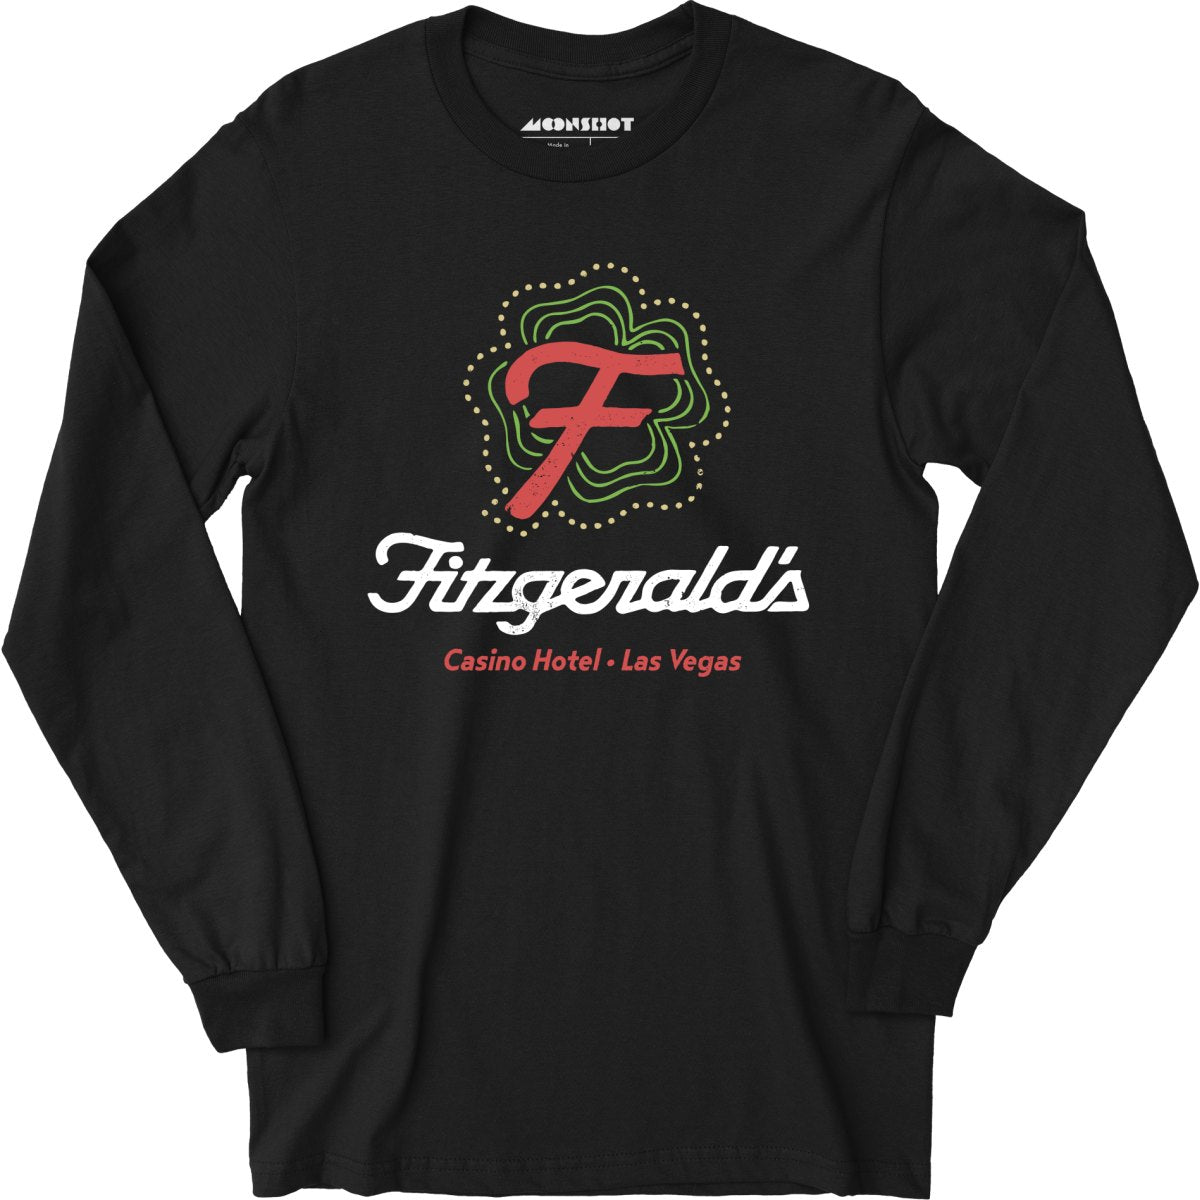 Fitzgerald's Hotel and Casino - Vintage Las Vegas - Long Sleeve T-Shirt